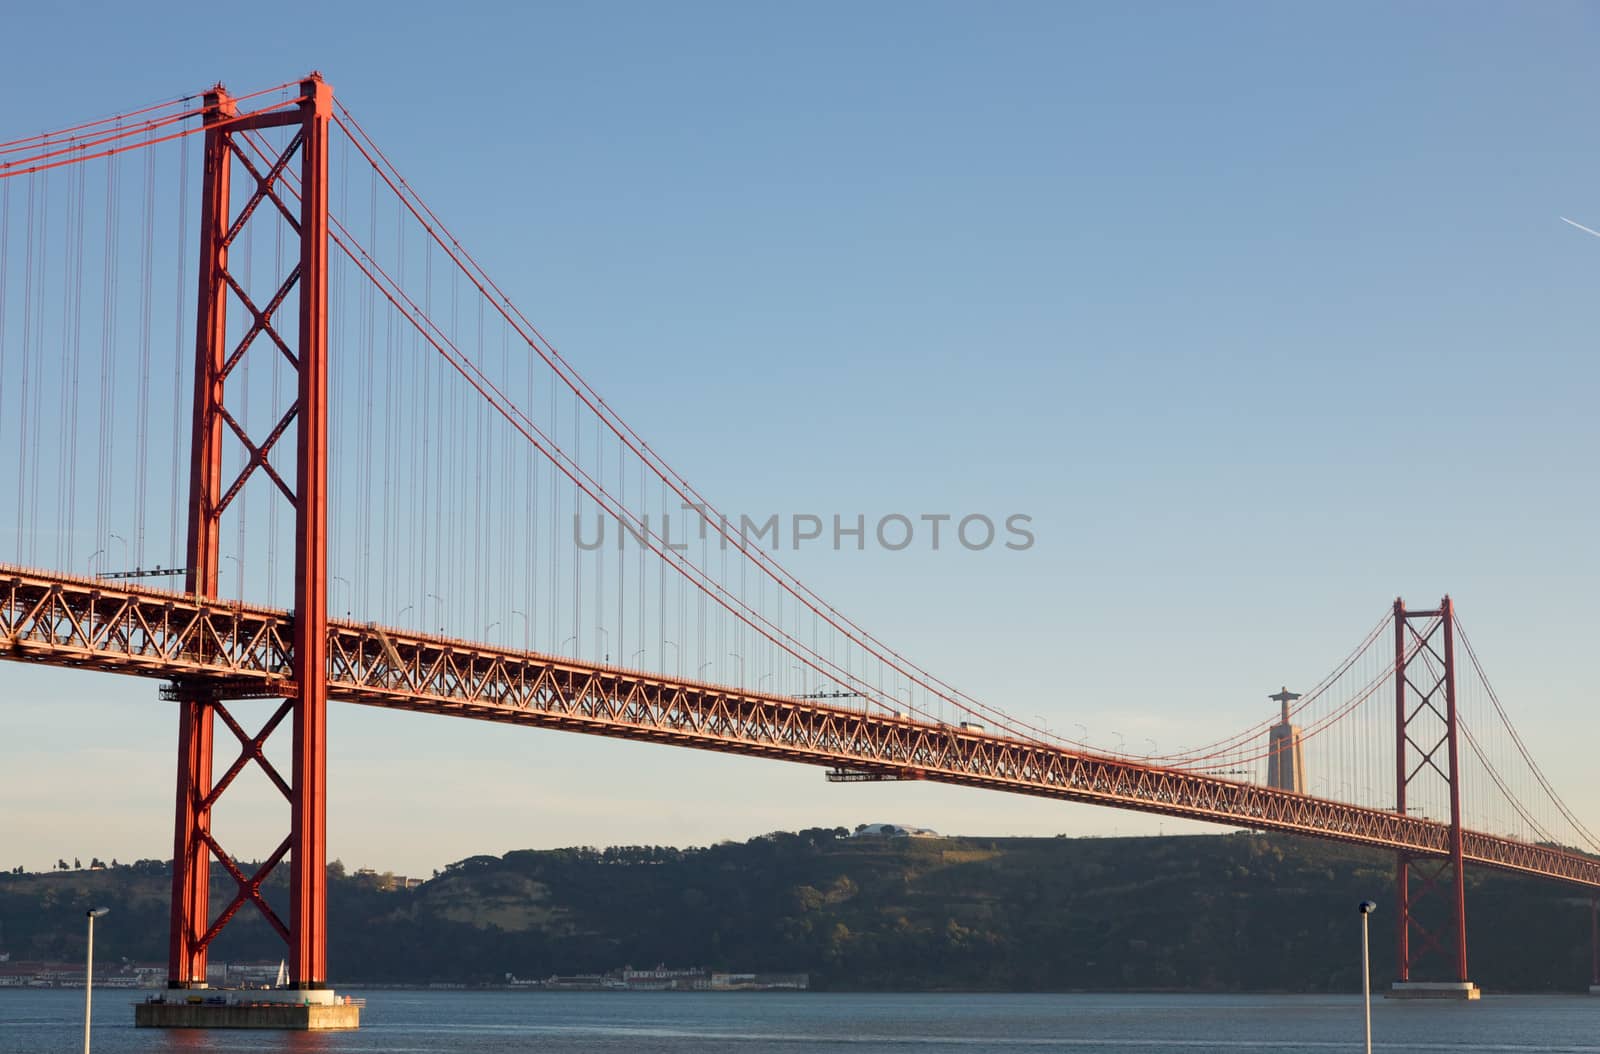 View of the April 25th Bridge in Lisbon, Portugal. This bridge is connecting Lisbon to the municipality of Almada on the south bank of the Tagus River. Statue of Jesus in the background.